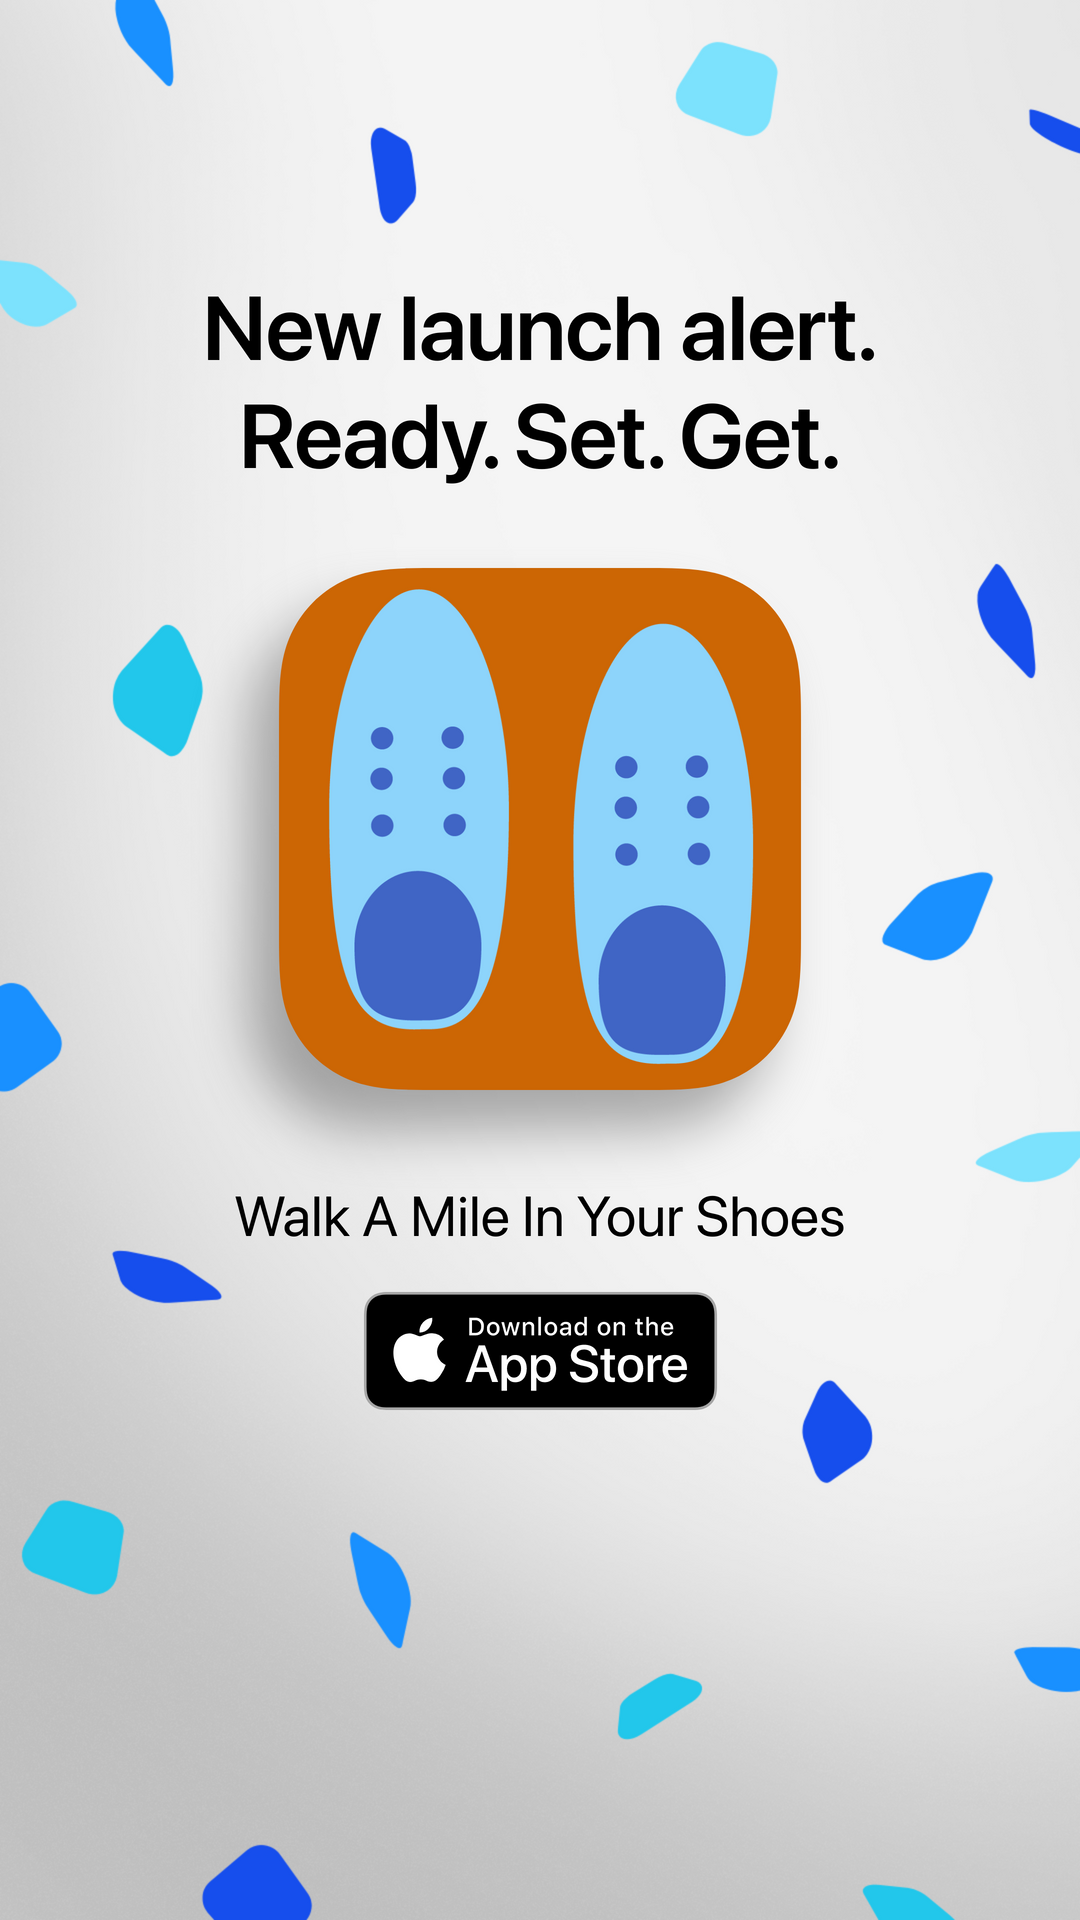 Walk A Mile In Your Shoes on iPhone